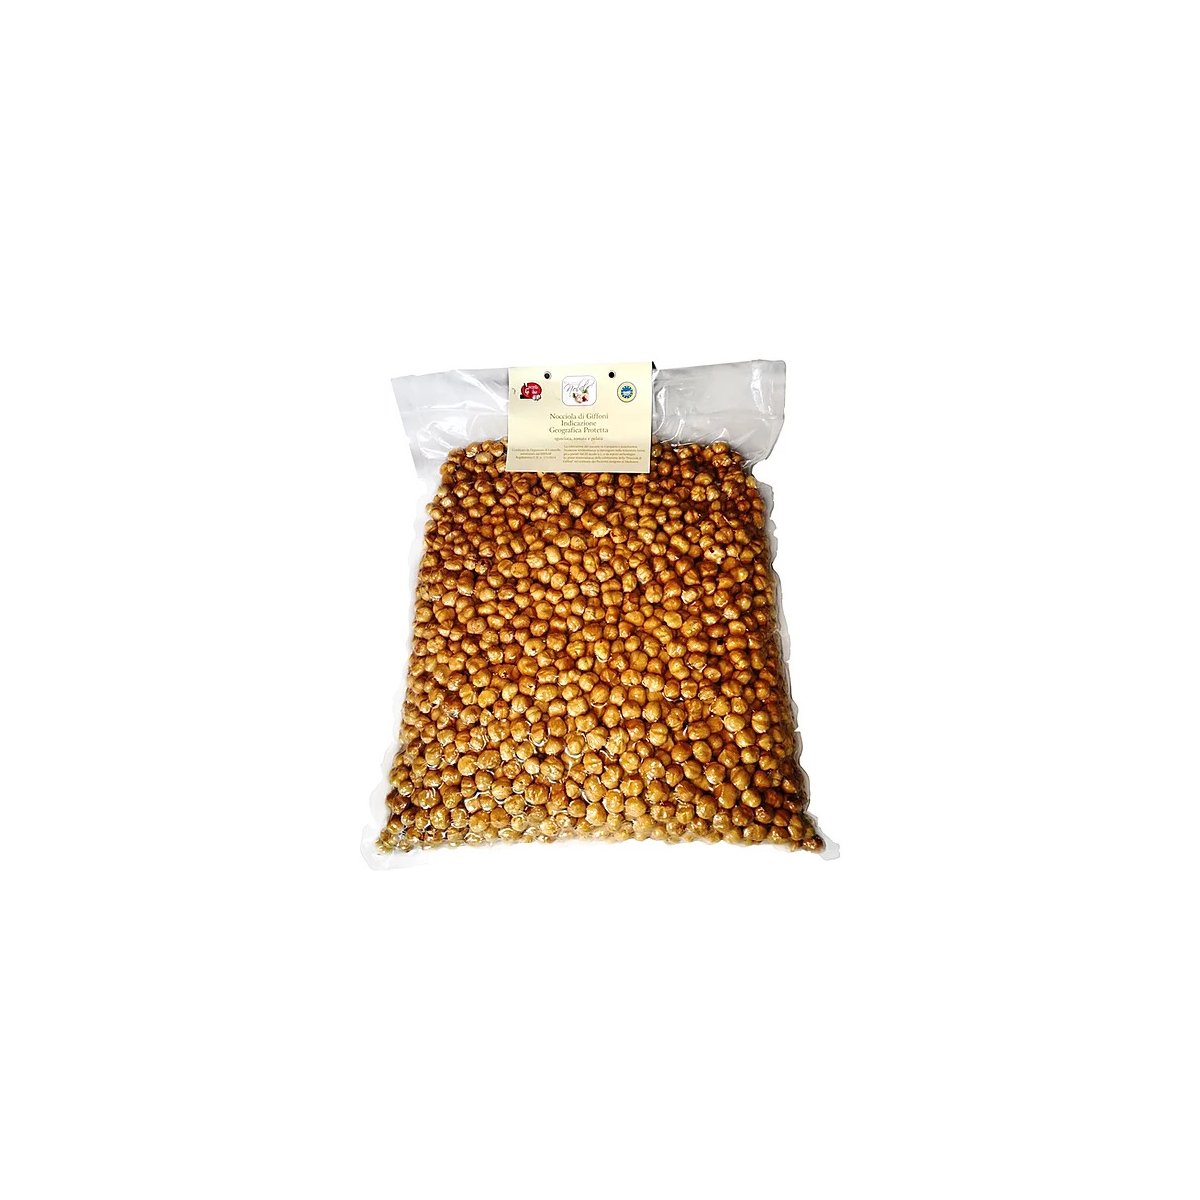 NOCCIOLE TOSTATE Giffoni IGP 12 Kg.